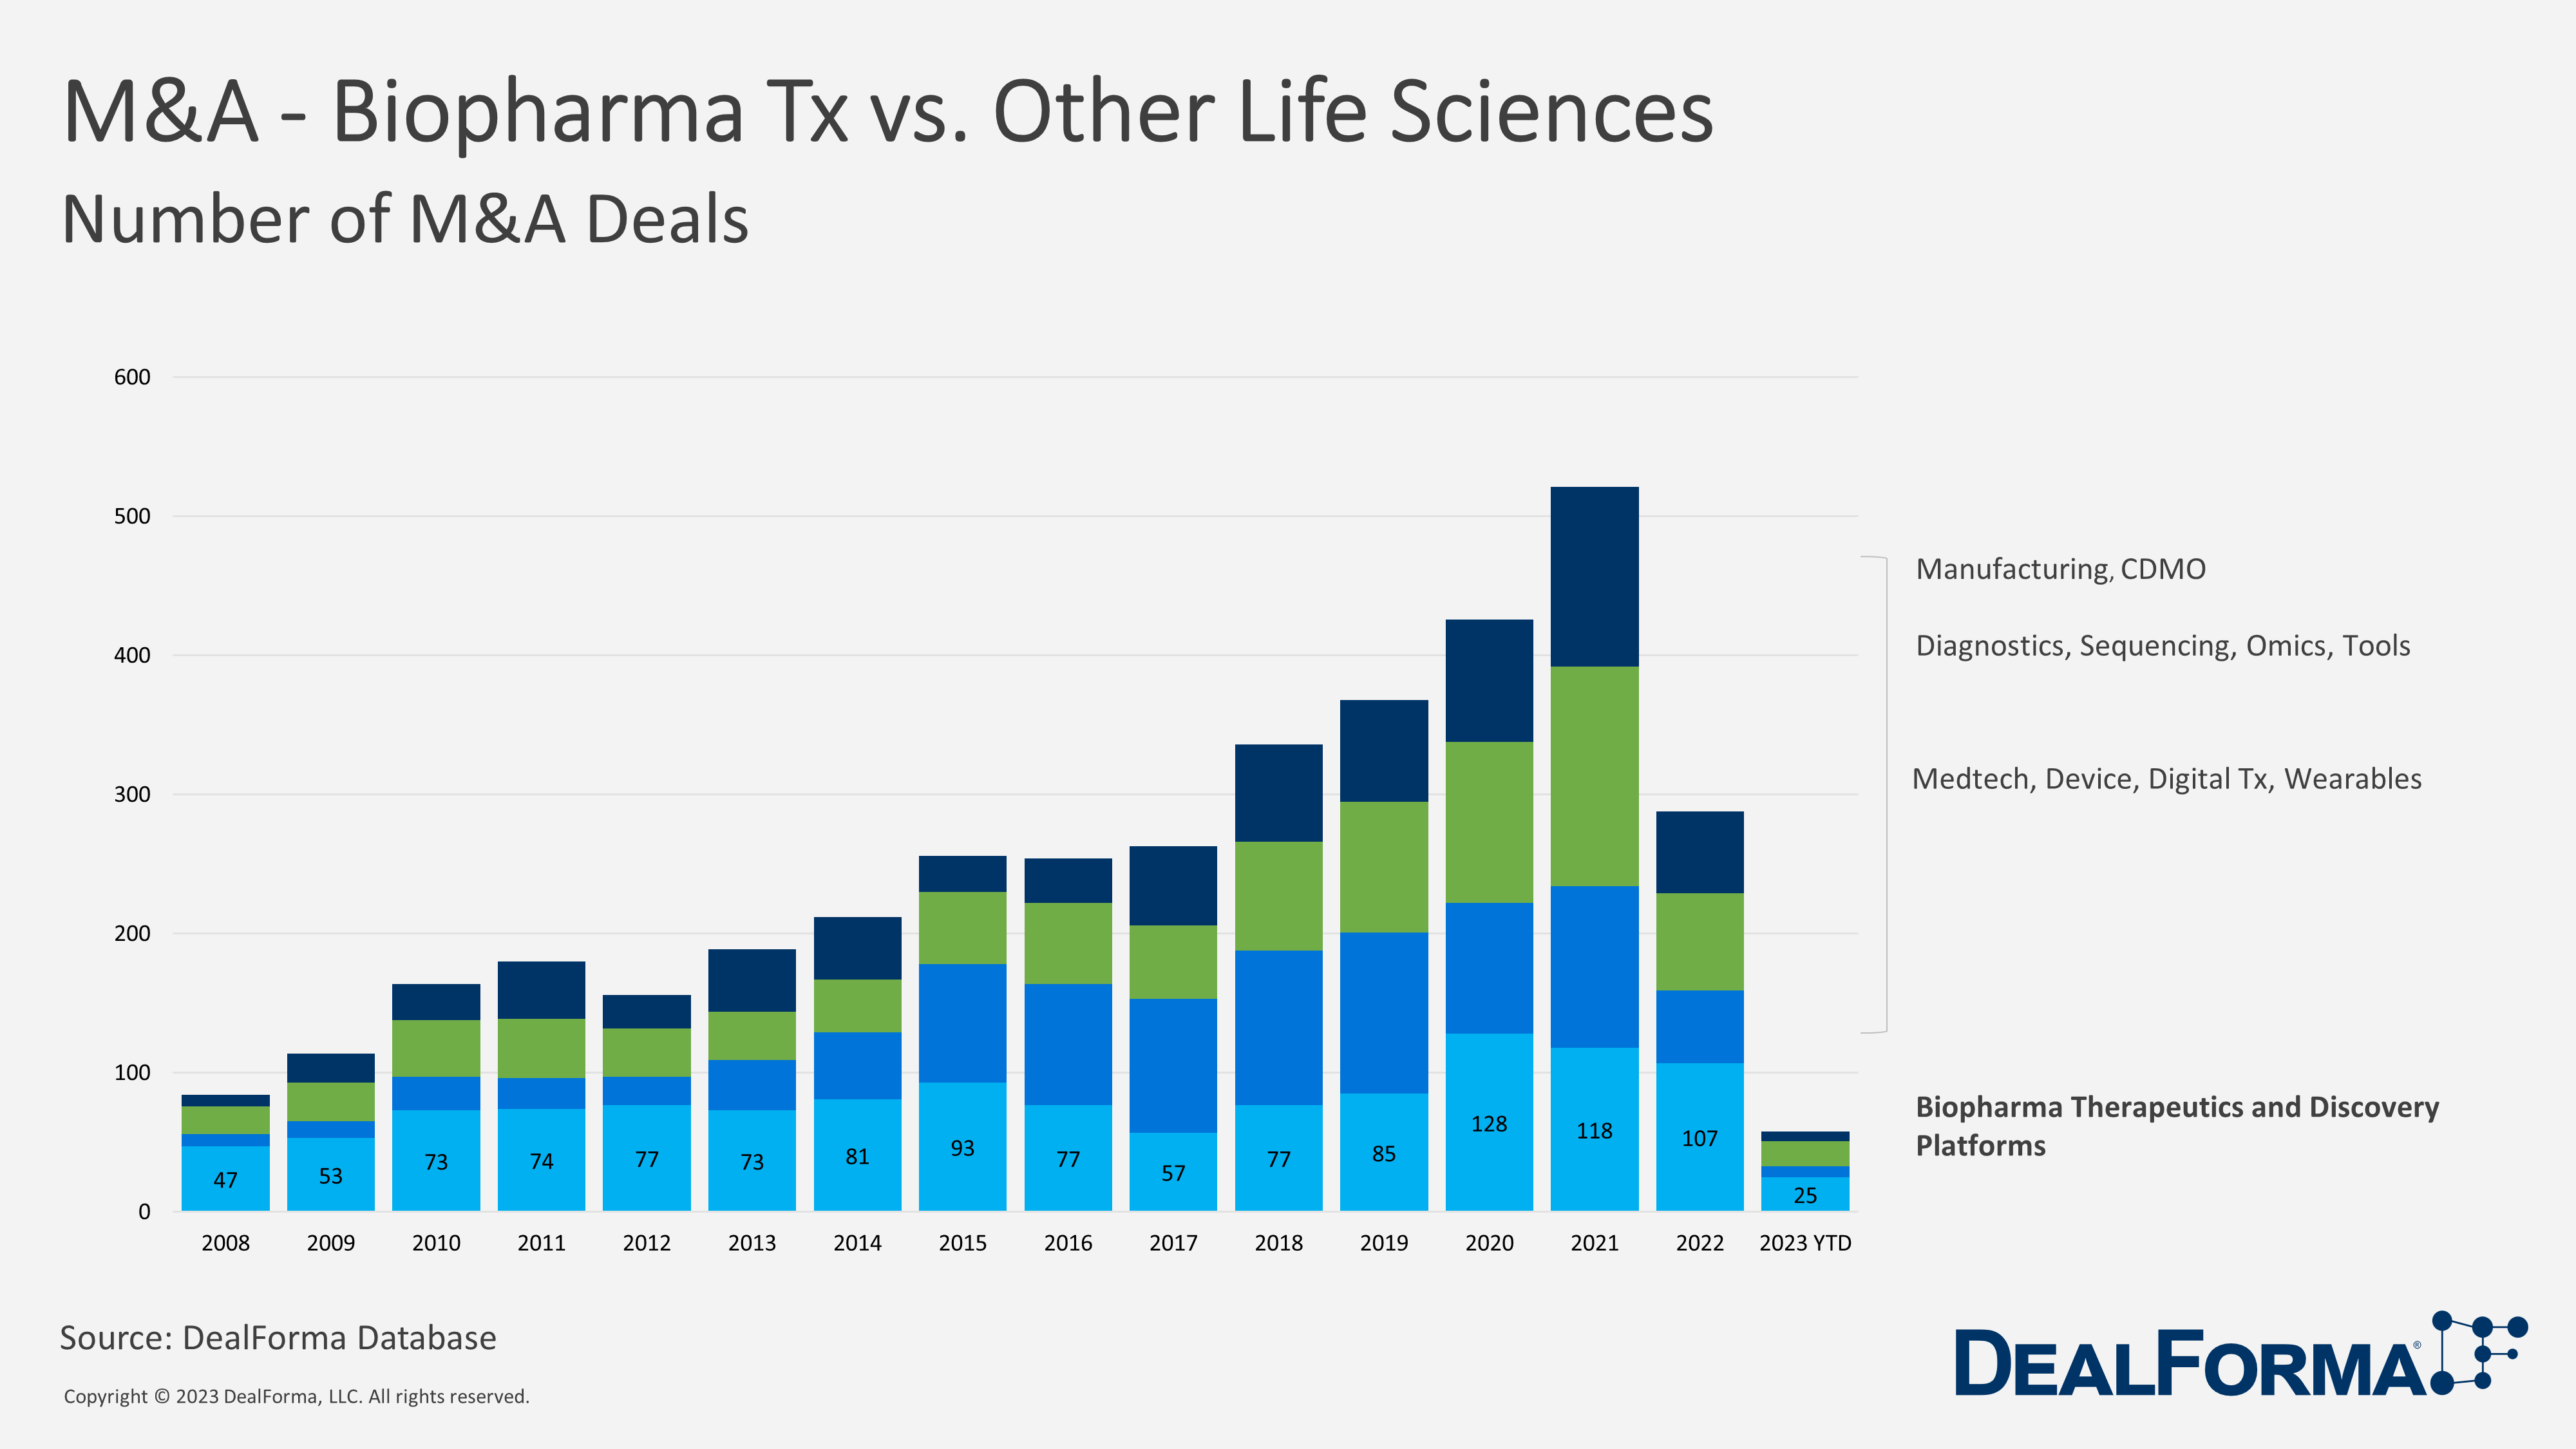 M&A - Biopharma Tx vs. Other Life Sciences. Number of M&A Deals